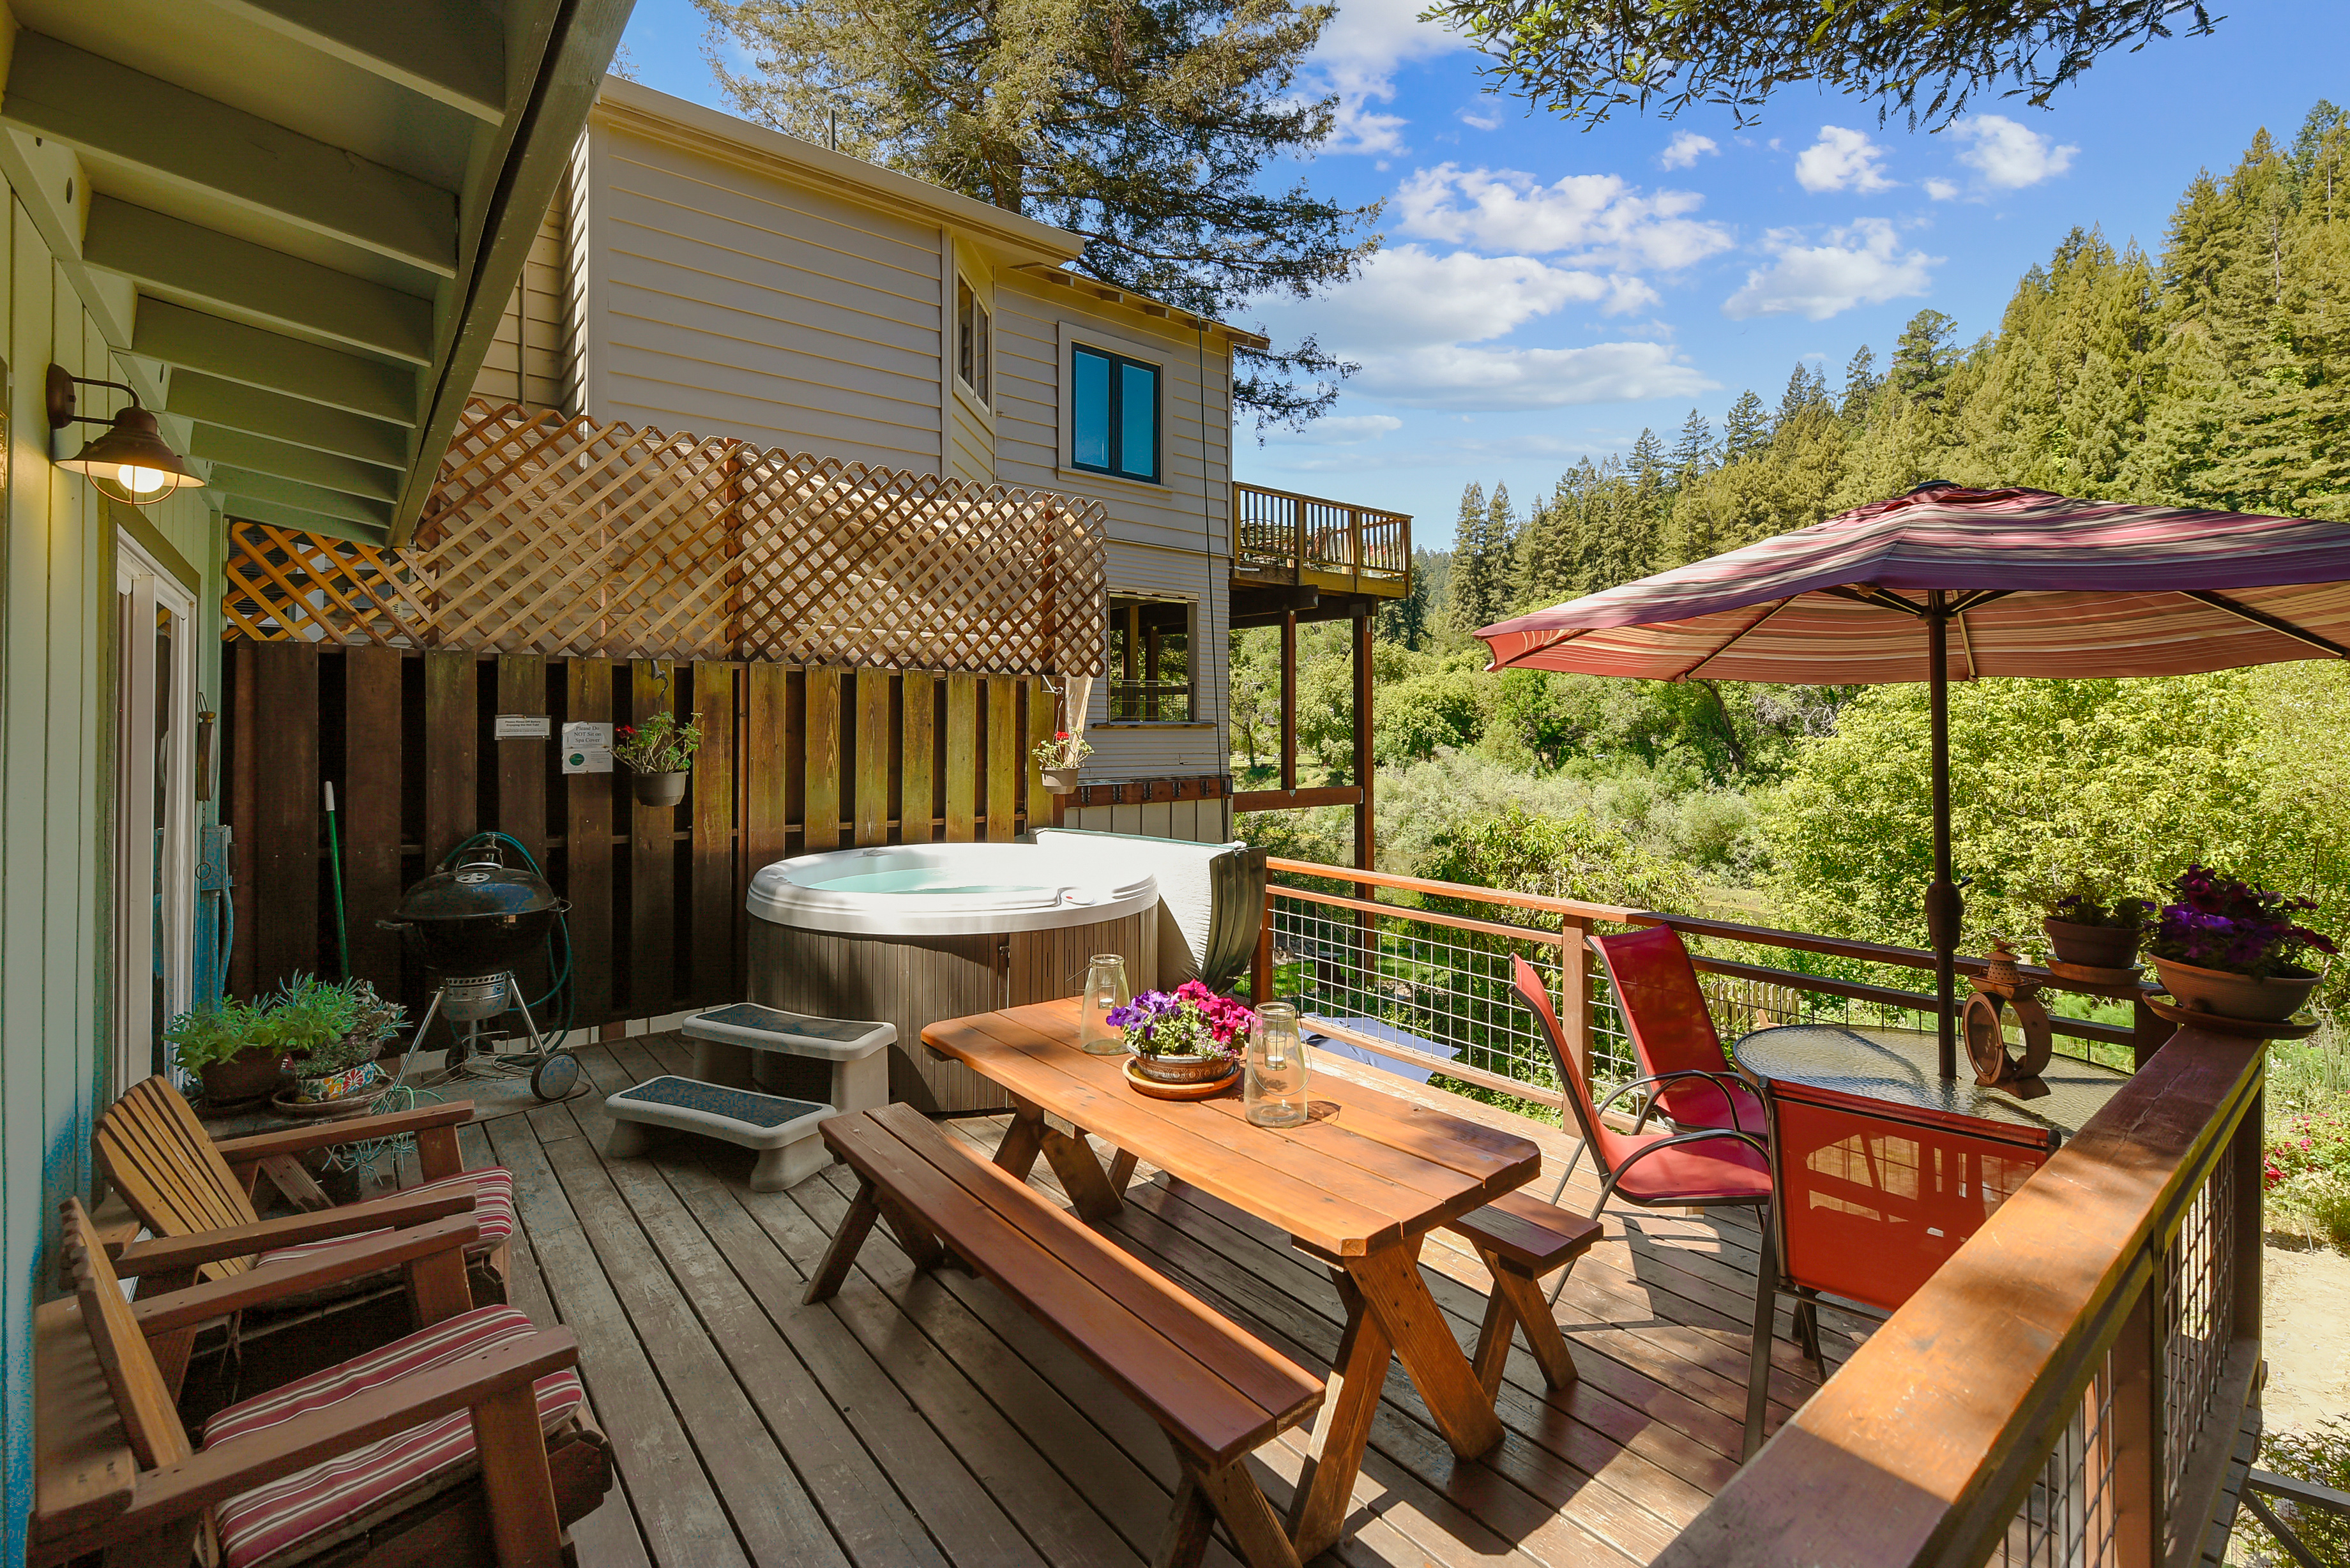 Step out to the back deck and enjoy!